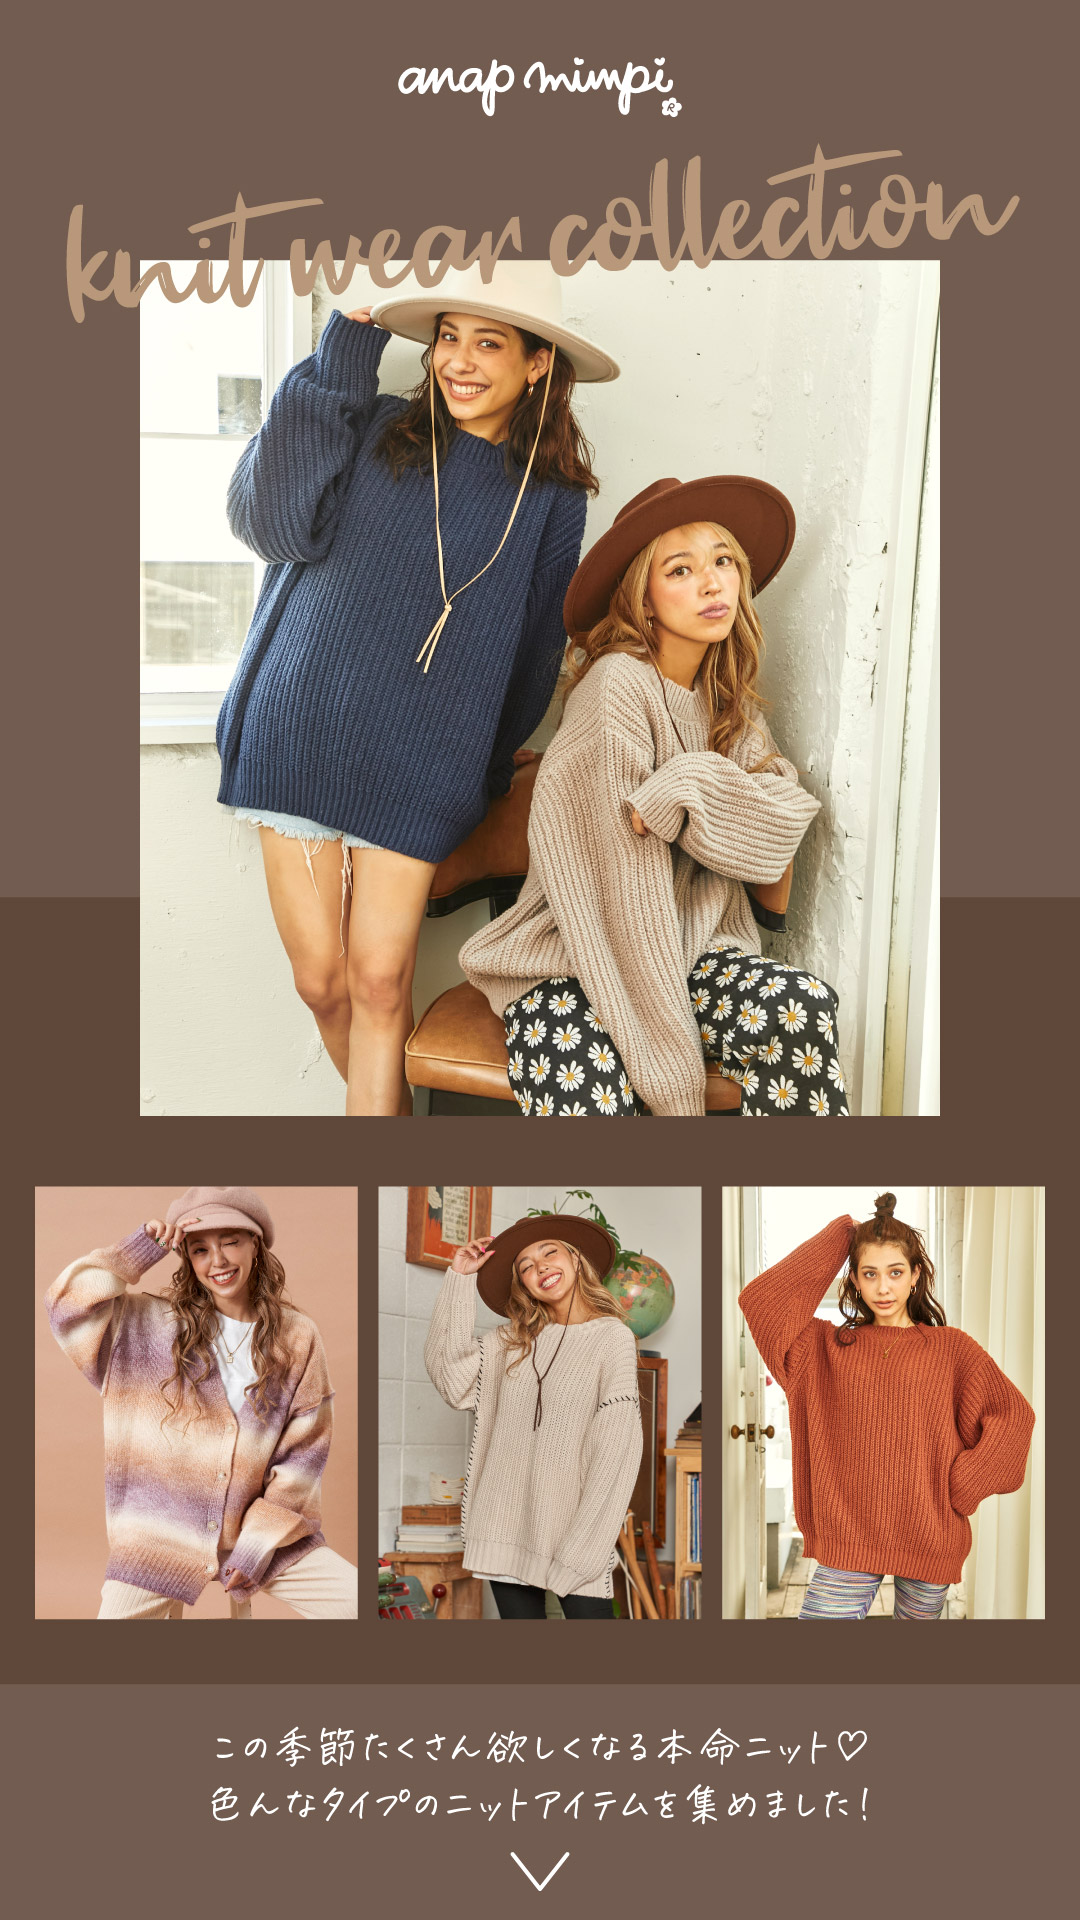 mimpi knit wear collection